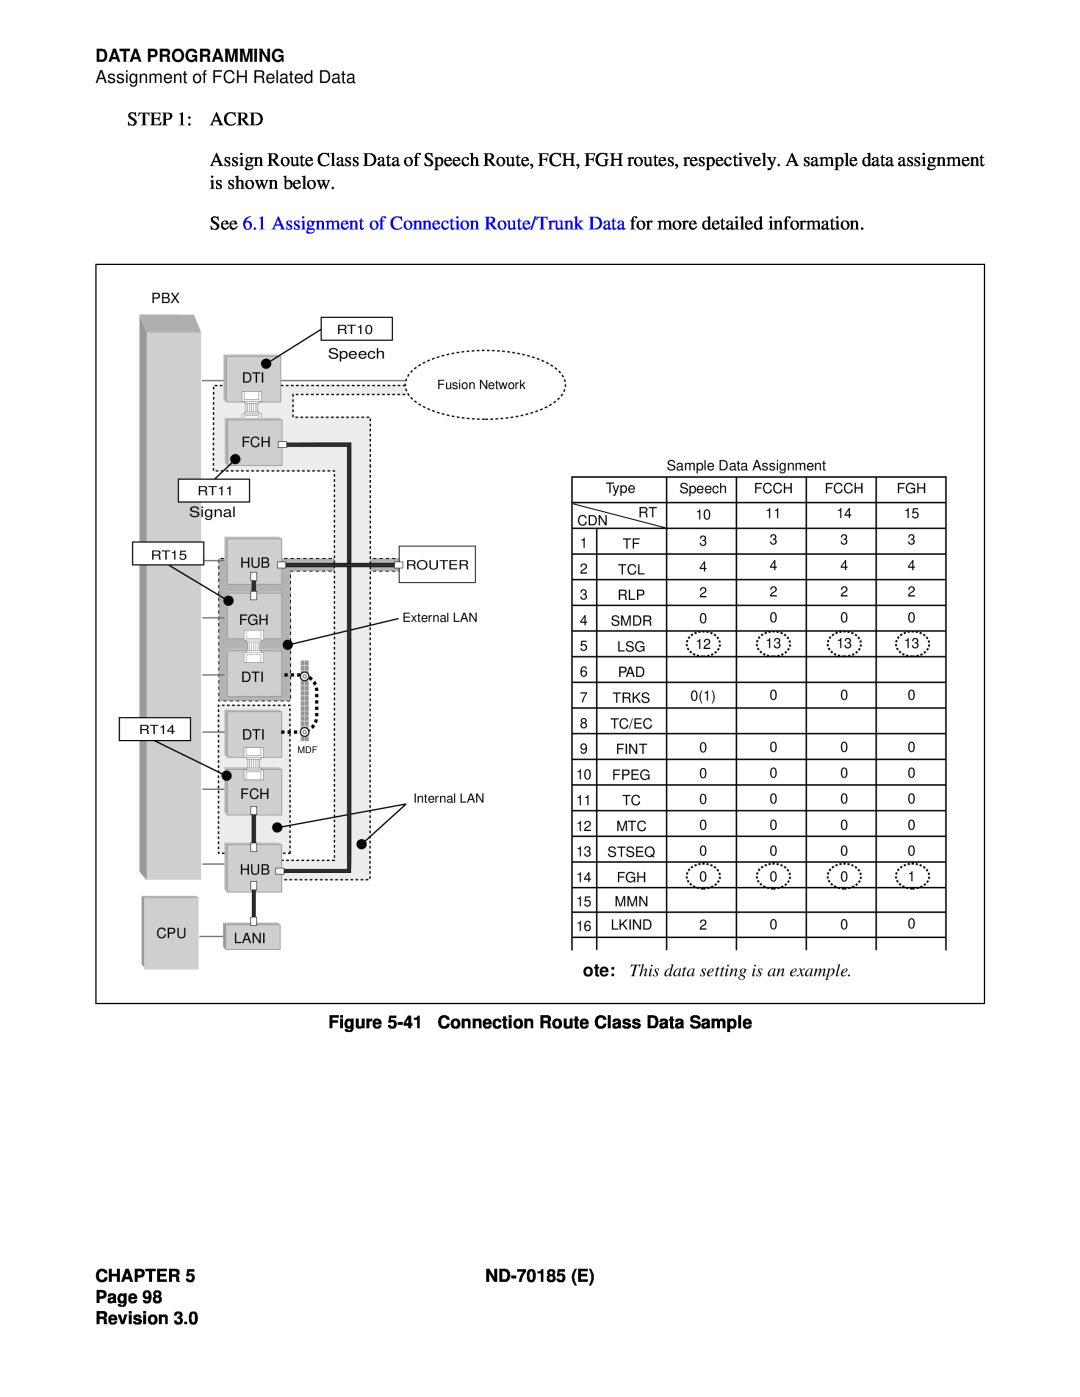 NEC NEAX2400 system manual Data Programming, 41Connection Route Class Data Sample, Chapter, ND-70185E, Page Revision 